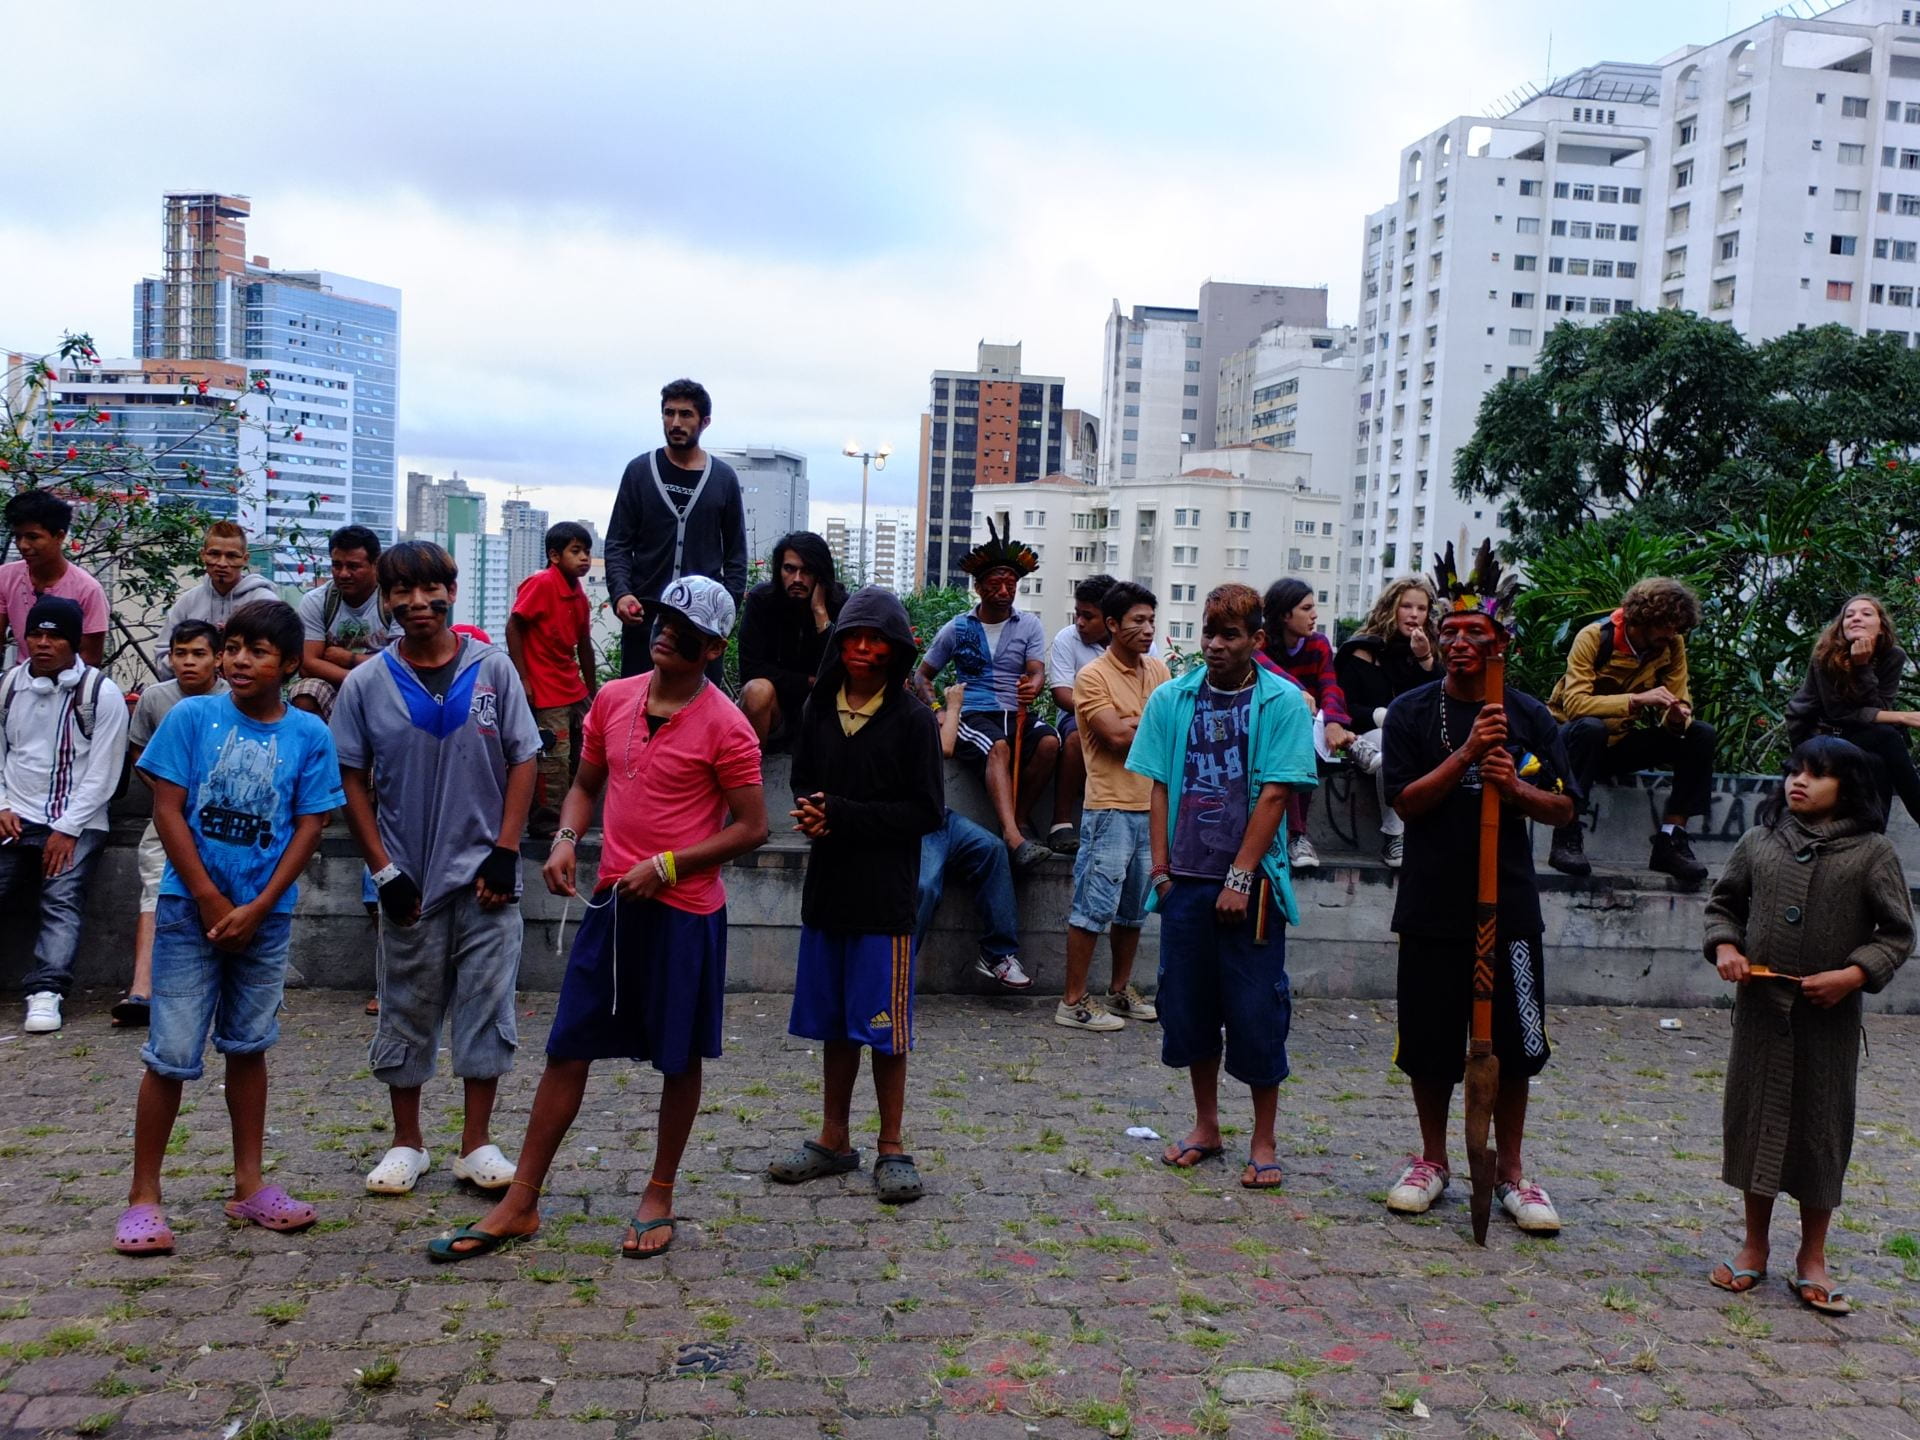 Image 3. Indigenous People Protesting Brazil Government. Source Flickr.